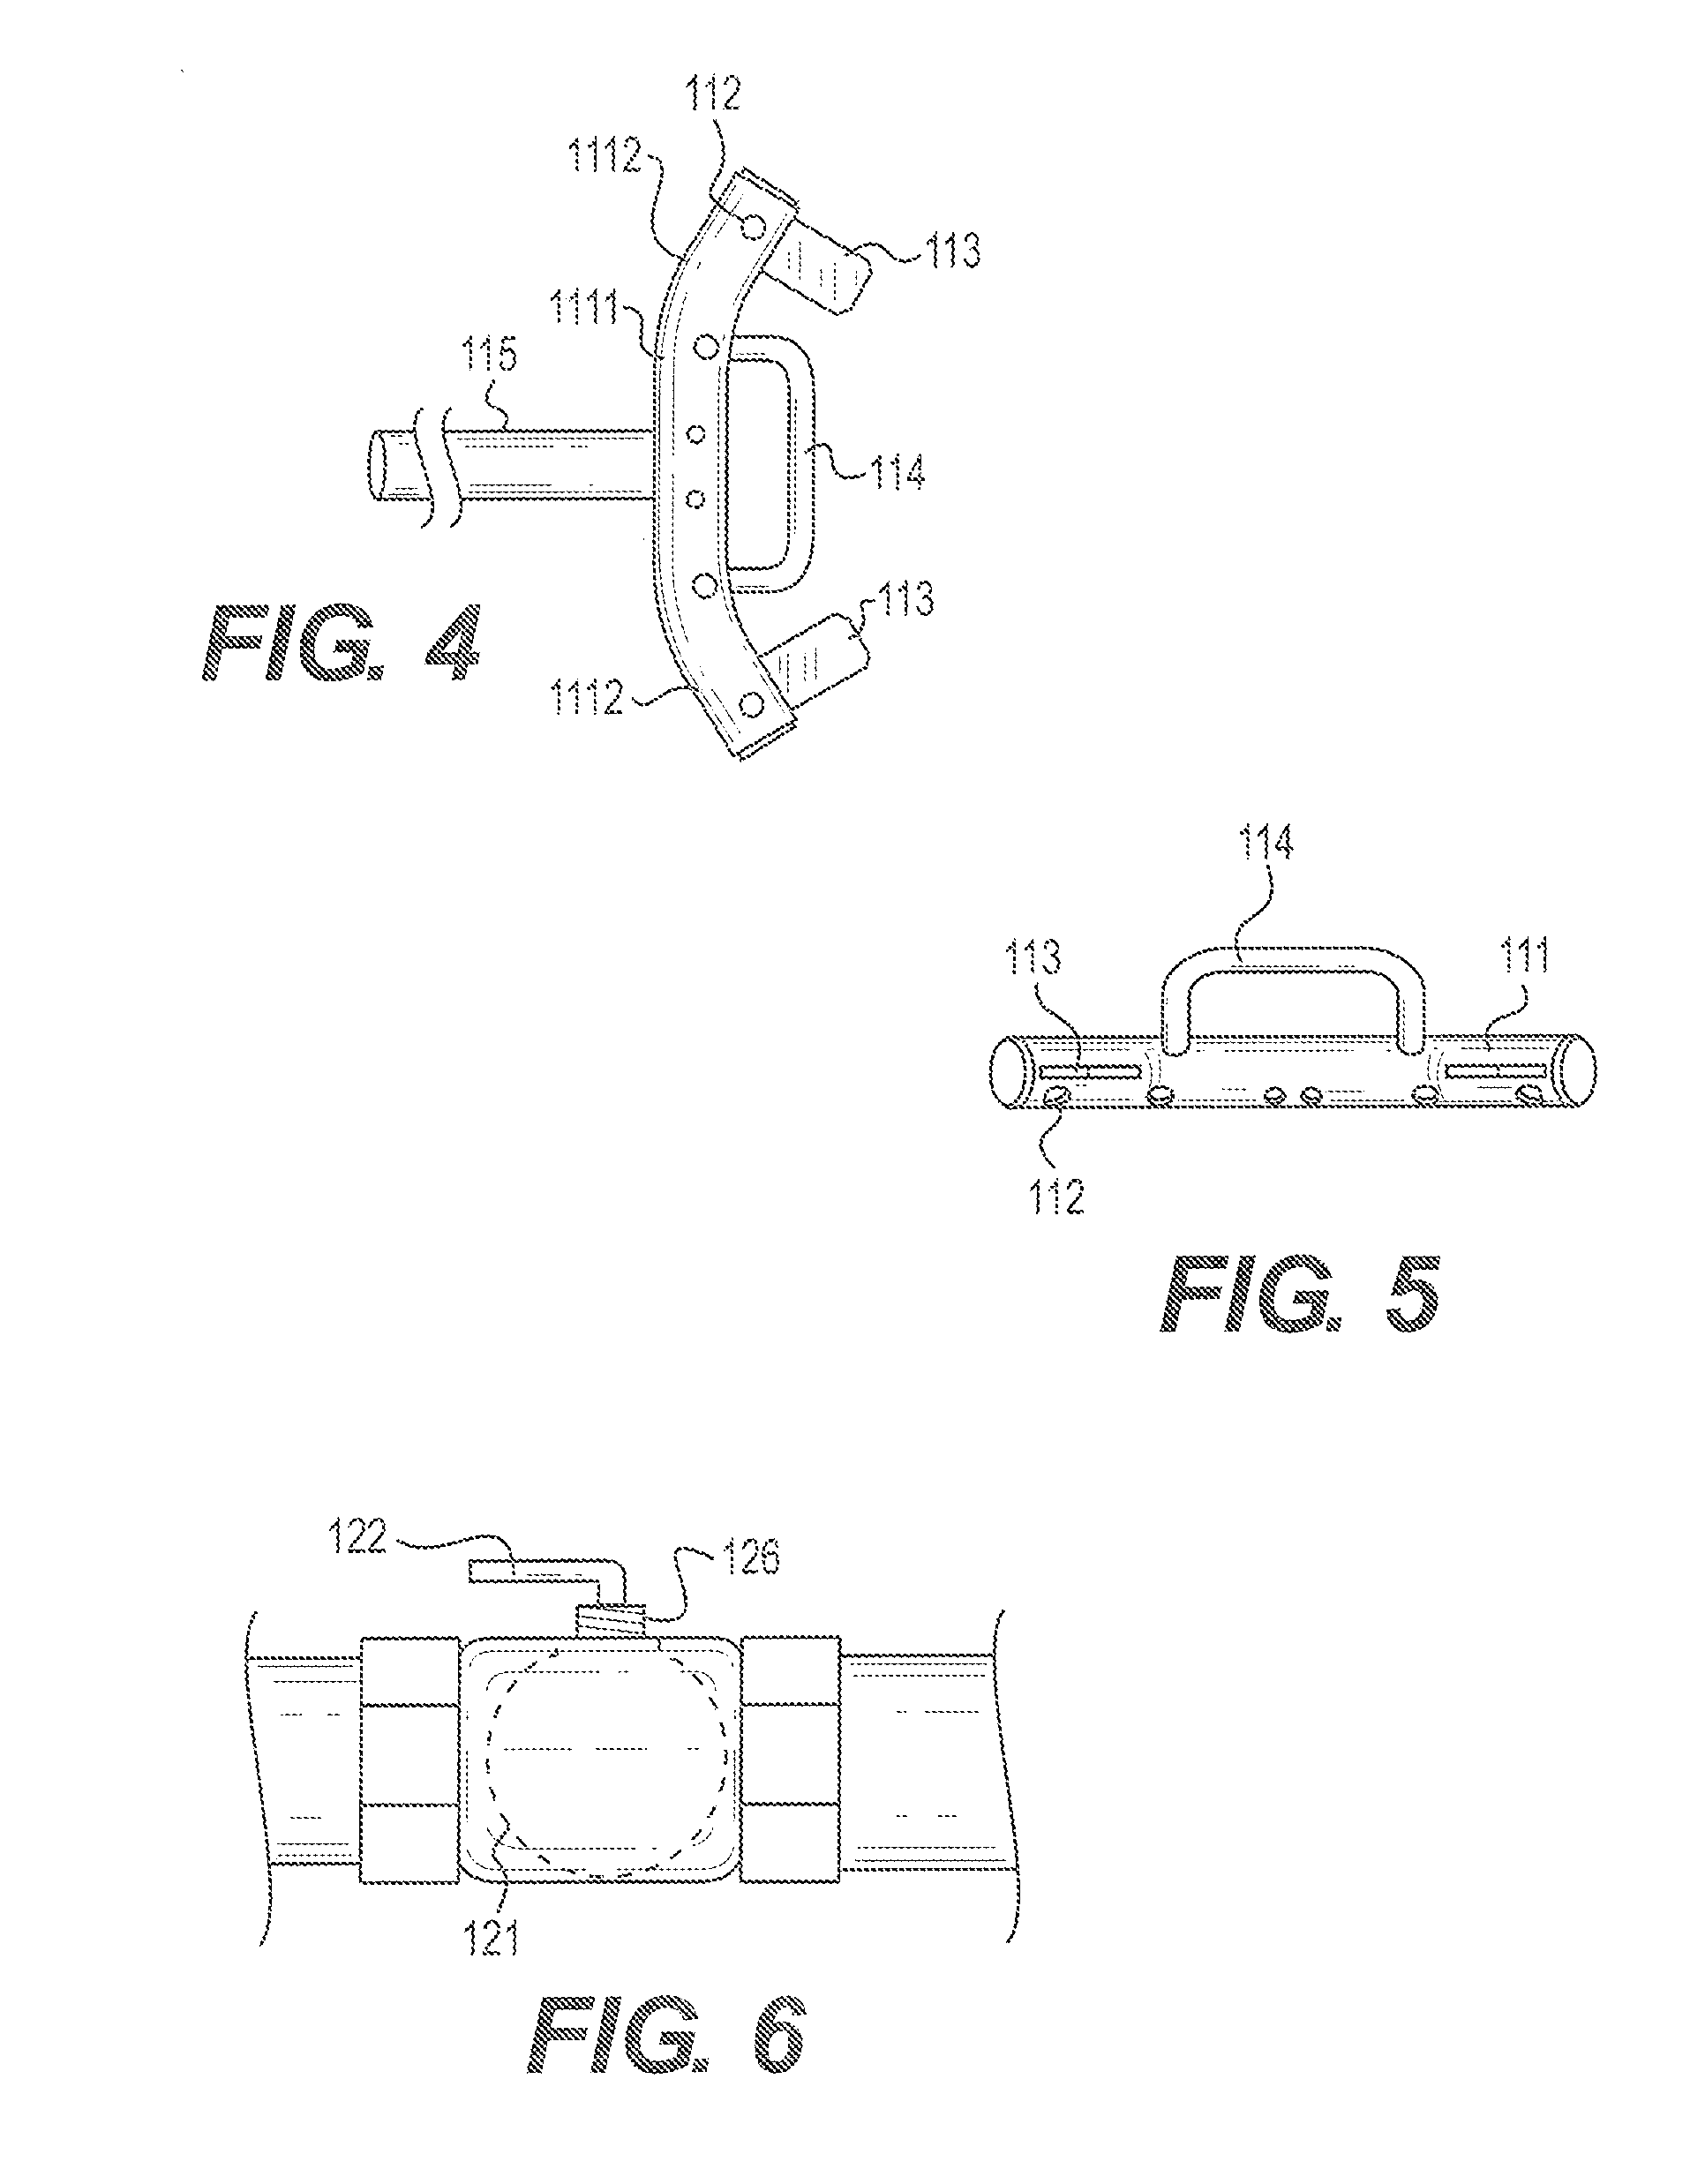 Apparatus and method for sealing tubeless tires